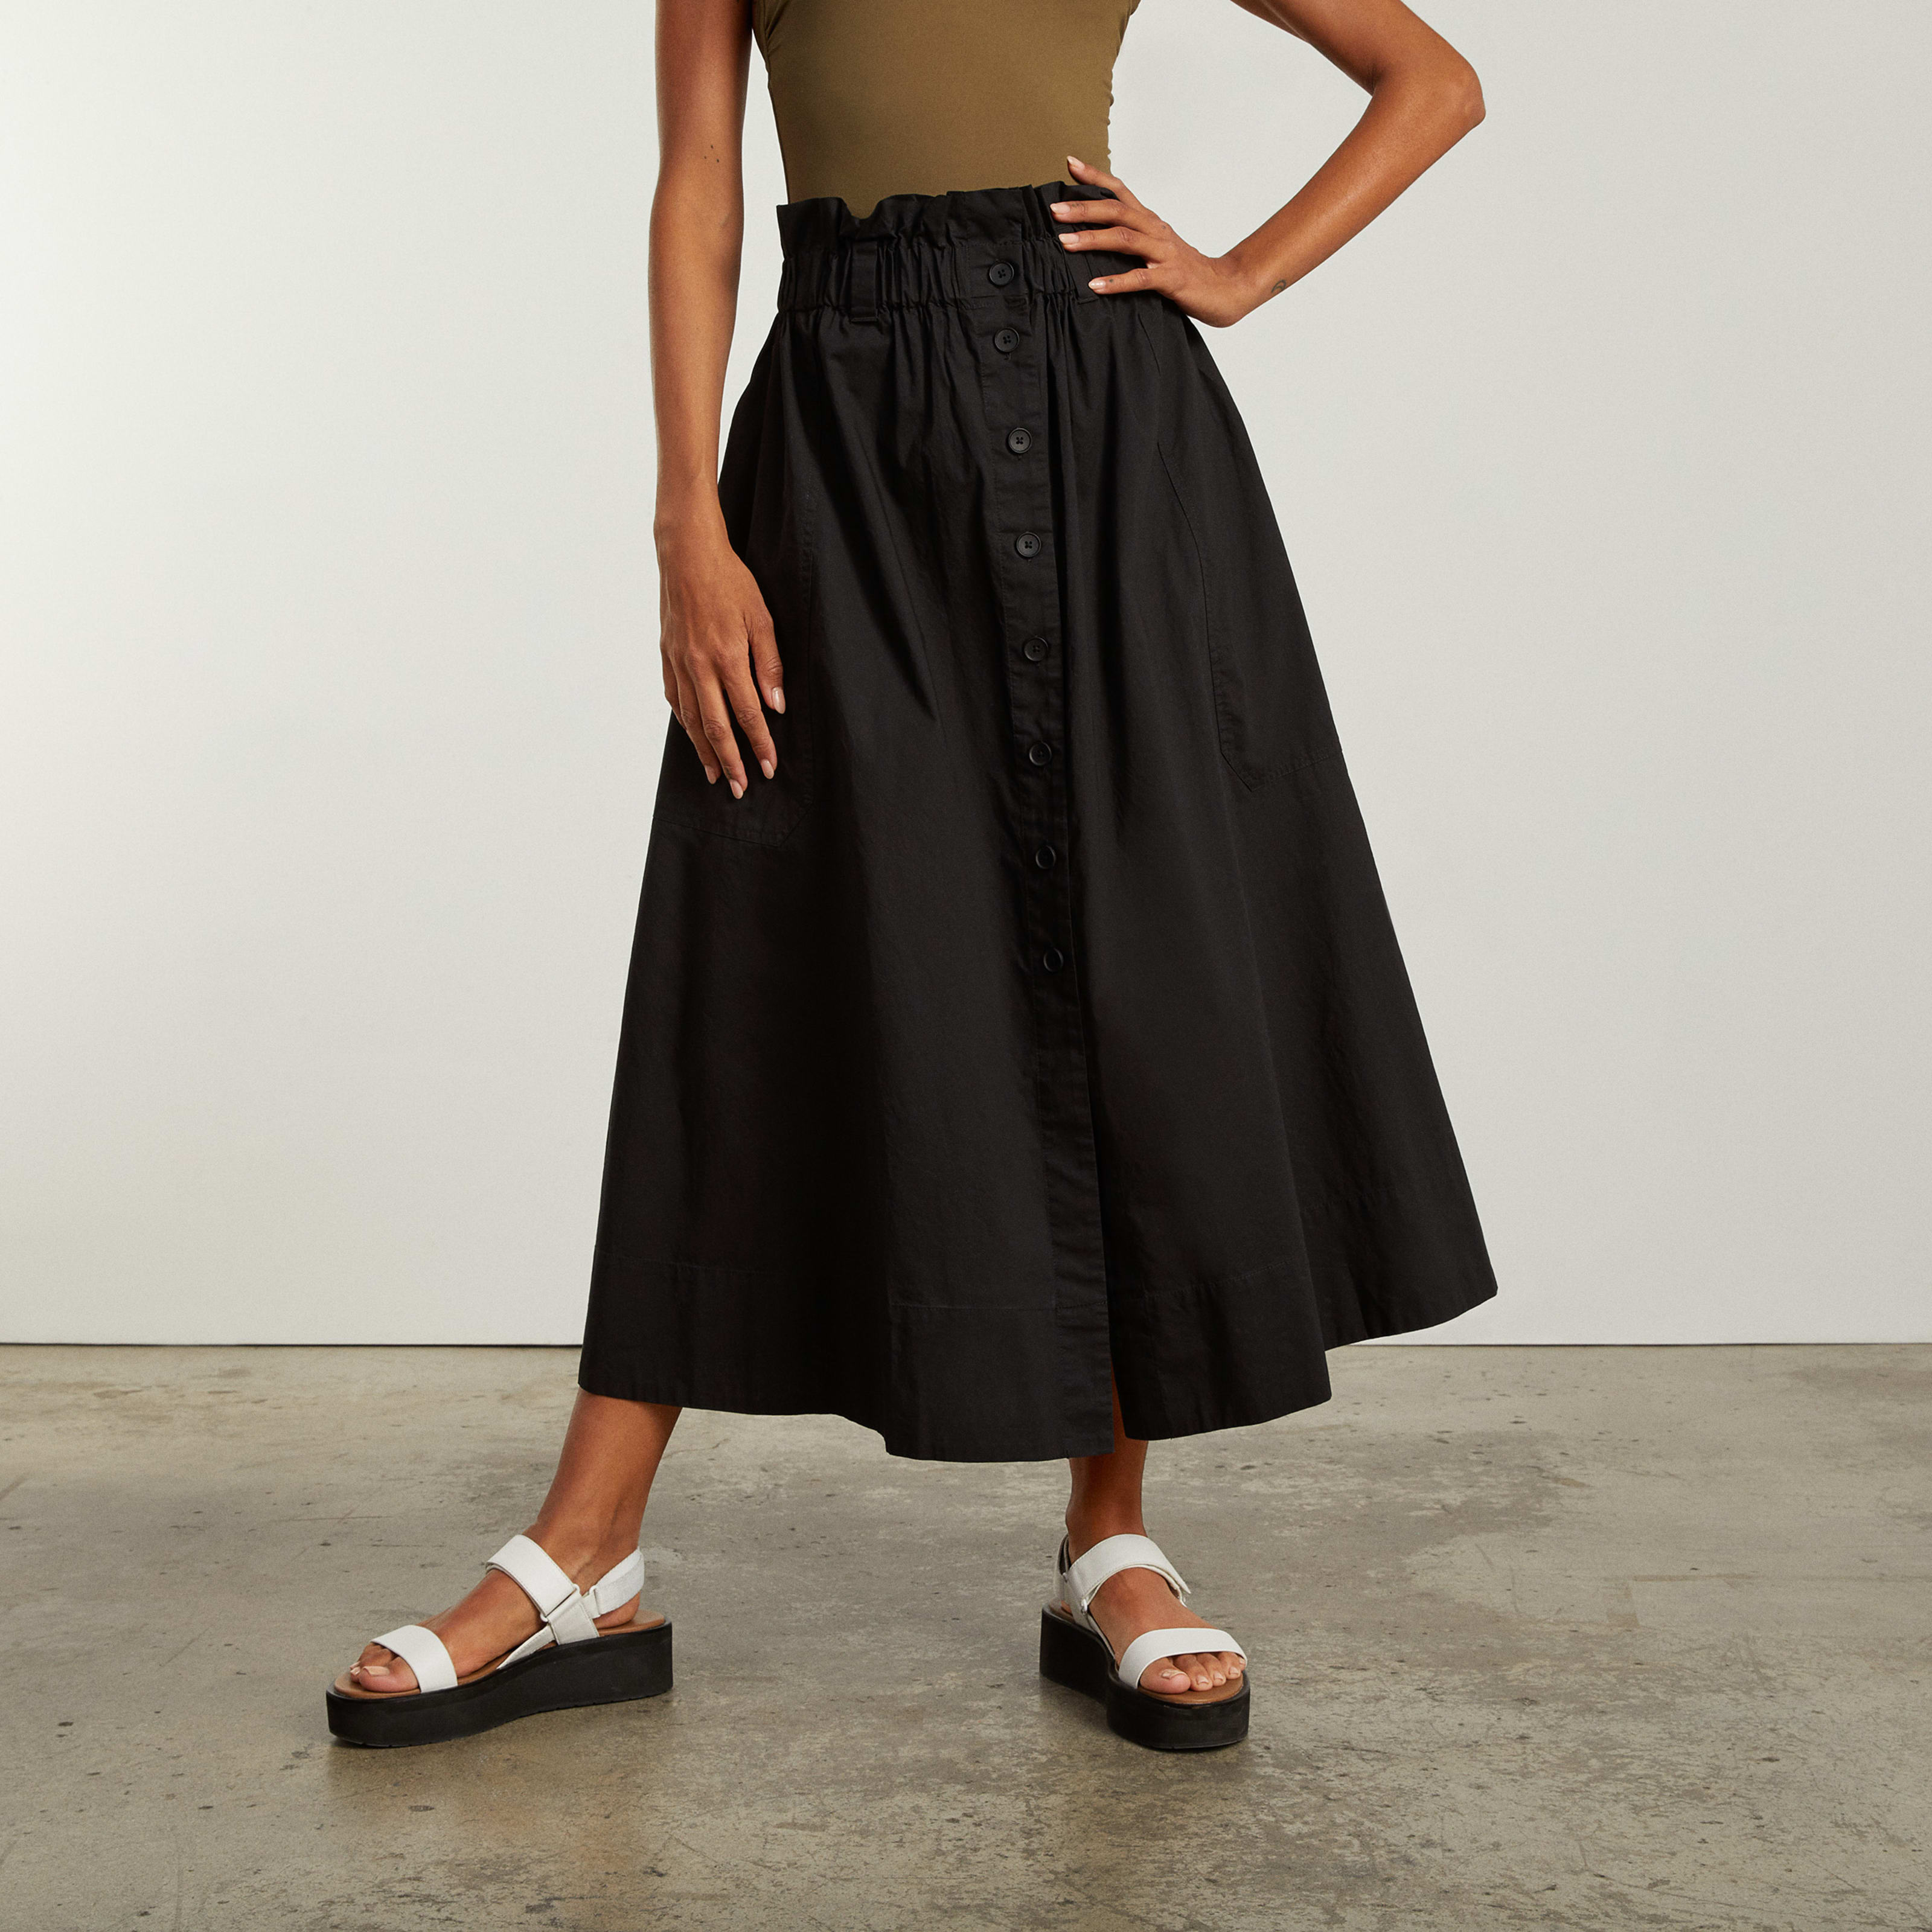 Women's Easy Button-Front Skirt by Everlane in Black, Size L